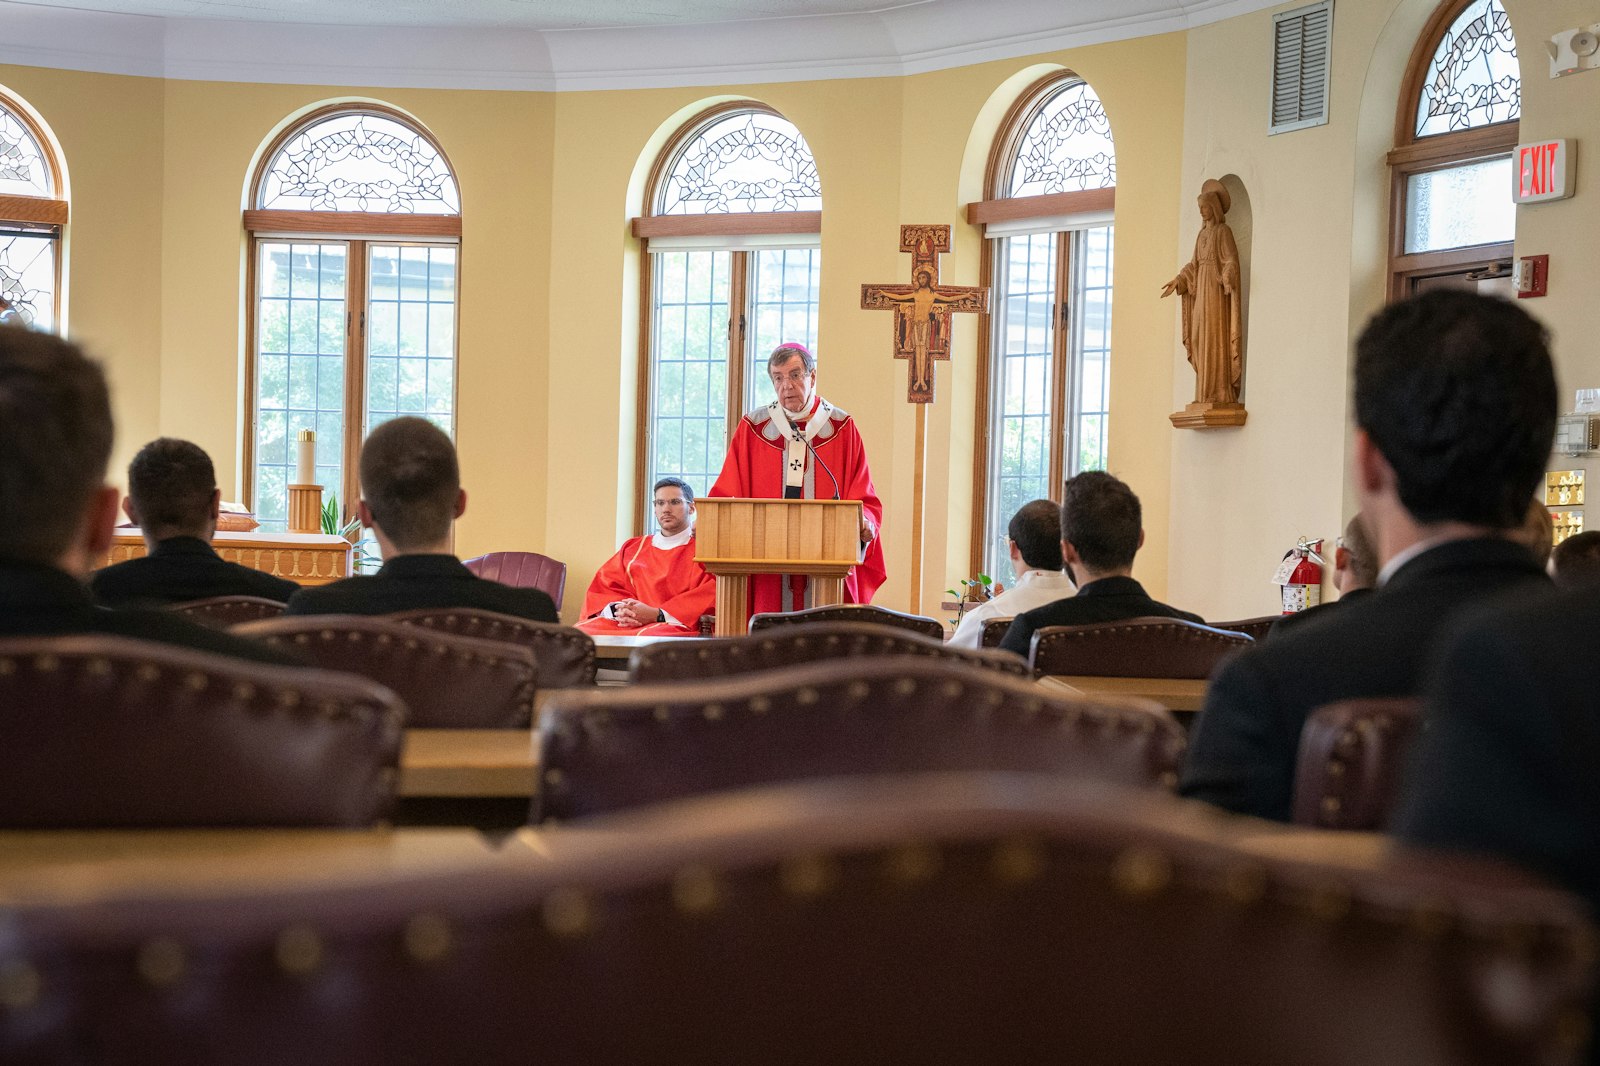 Detroit Archbishop Allen H. Vigneron preaches a homily during the Mass of Candidacy for four Detroit seminarians Aug. 10 at Manresa Jesuit Retreat House in Bloomfield Hills. The men, who will begin theology studies at Sacred Heart Major Seminary this fall, are now entering a more "public phase" of their discernment.